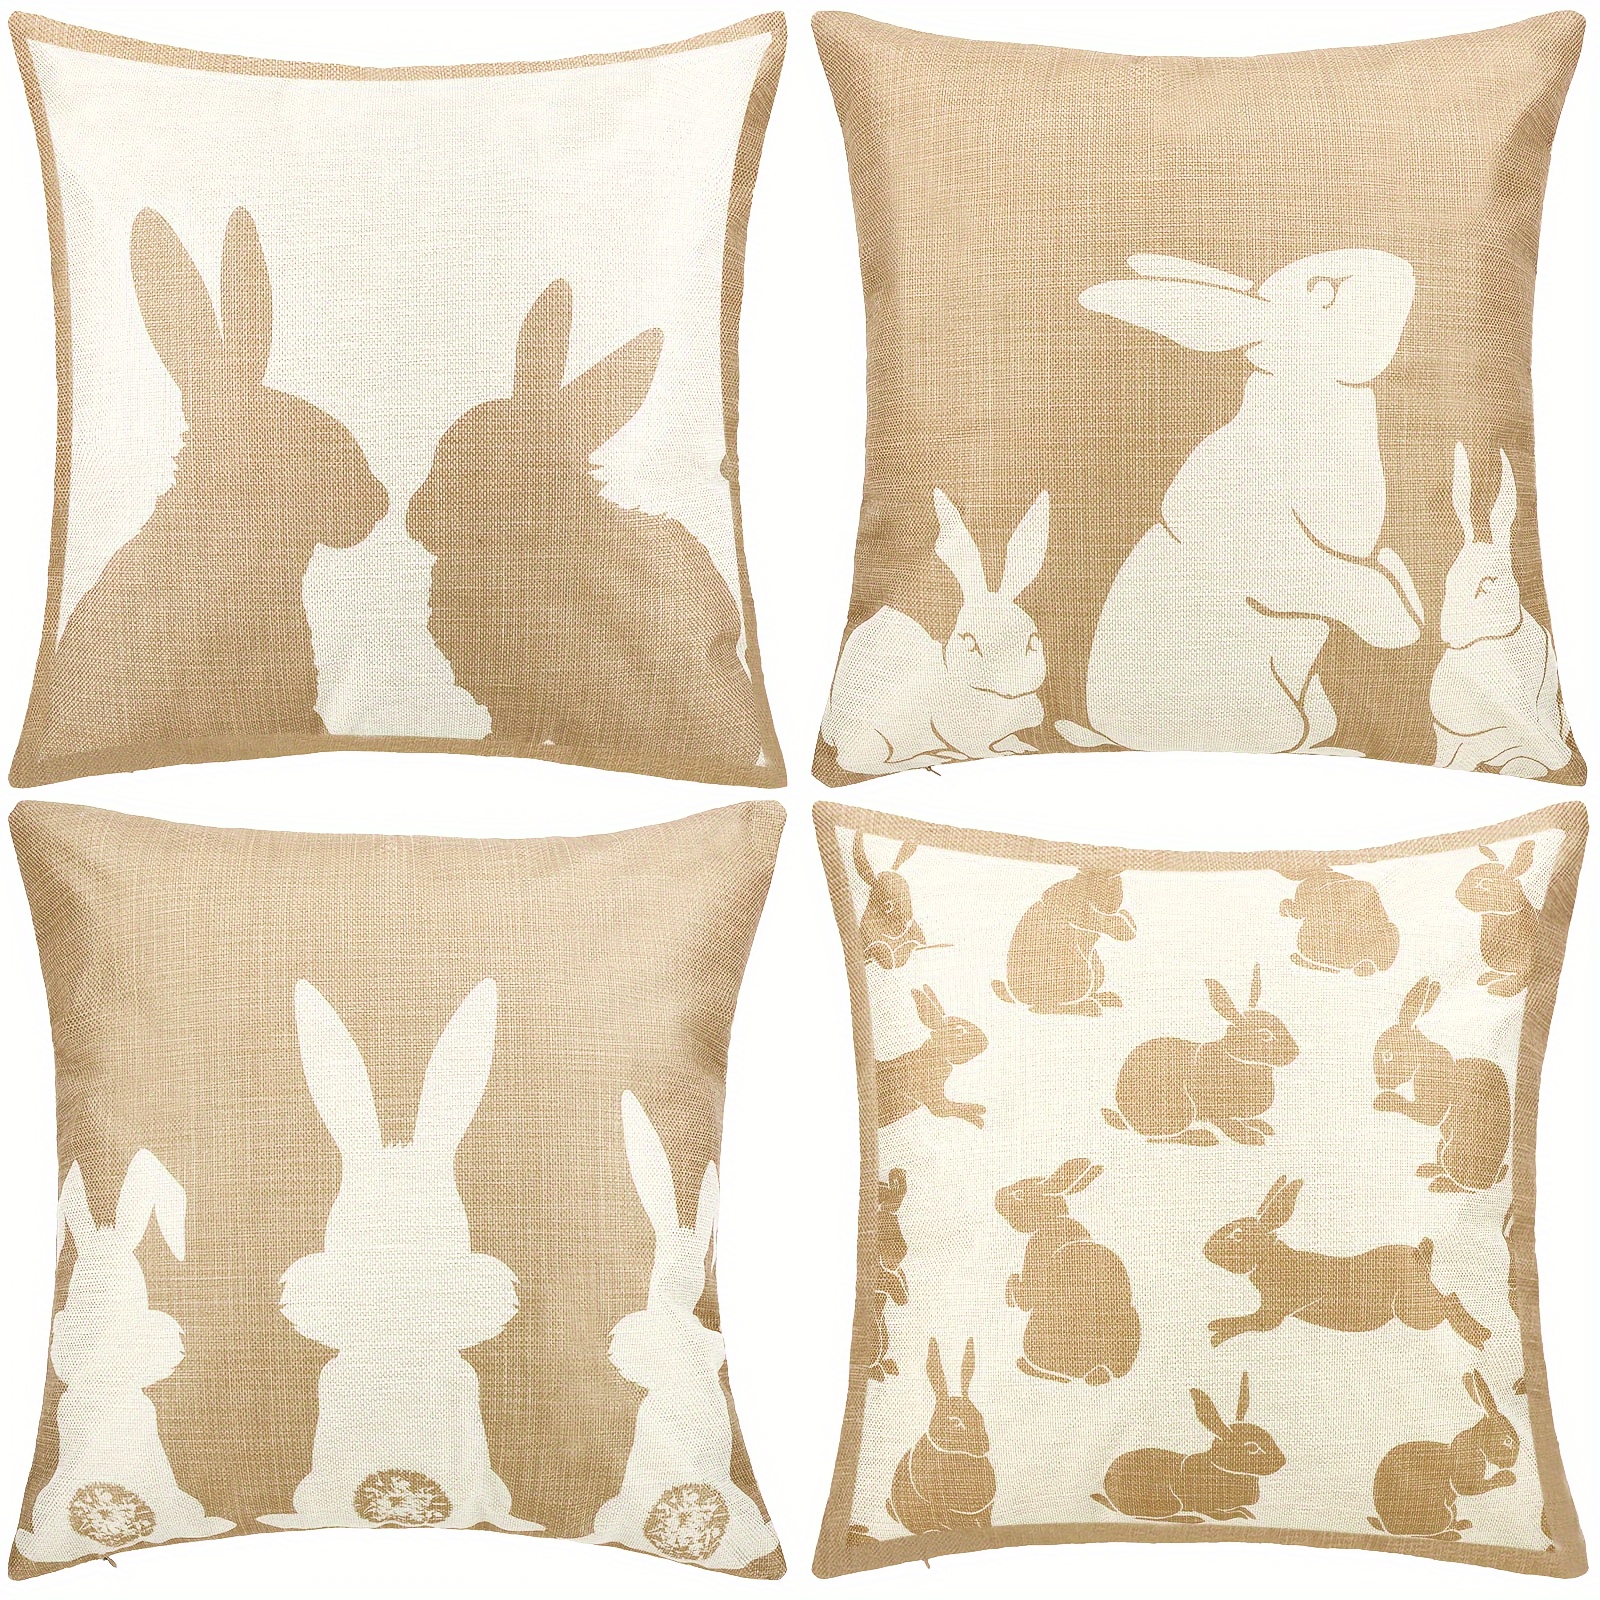 

4pcs Happy Easter Throw Pillow Covers Rabbit Bunnies Cushion Pillowcase Beige And White Rabbits Pillowcase Cushion Cover For Easter Bedroom Sofa Decorations (18 X 18 Inch)